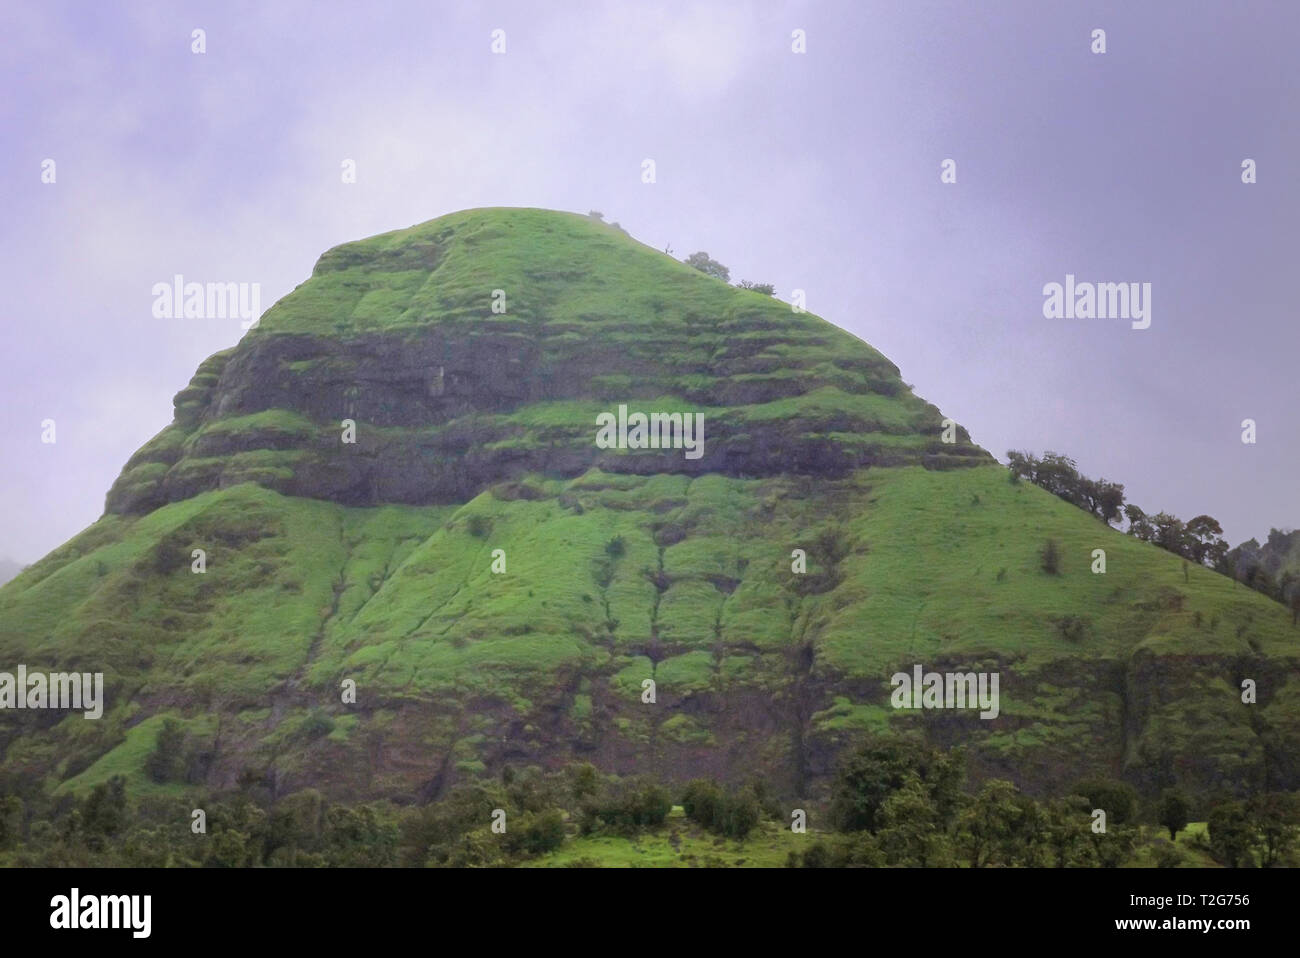 Spectacular view of hill with lush green vegetation against a blue sky Stock Photo